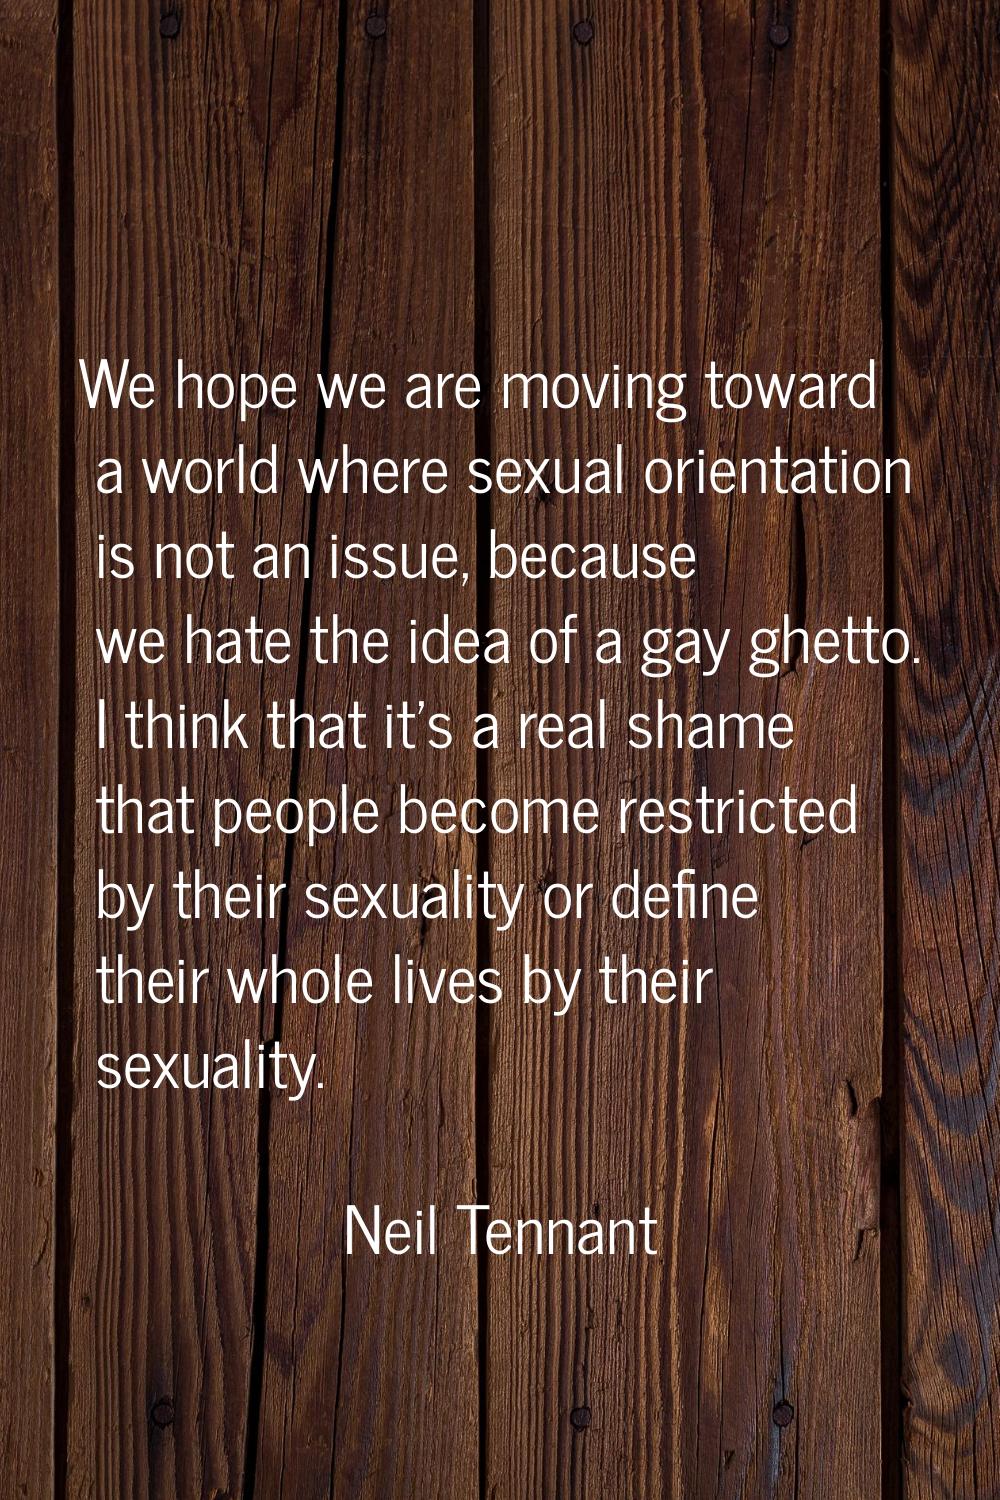 We hope we are moving toward a world where sexual orientation is not an issue, because we hate the 